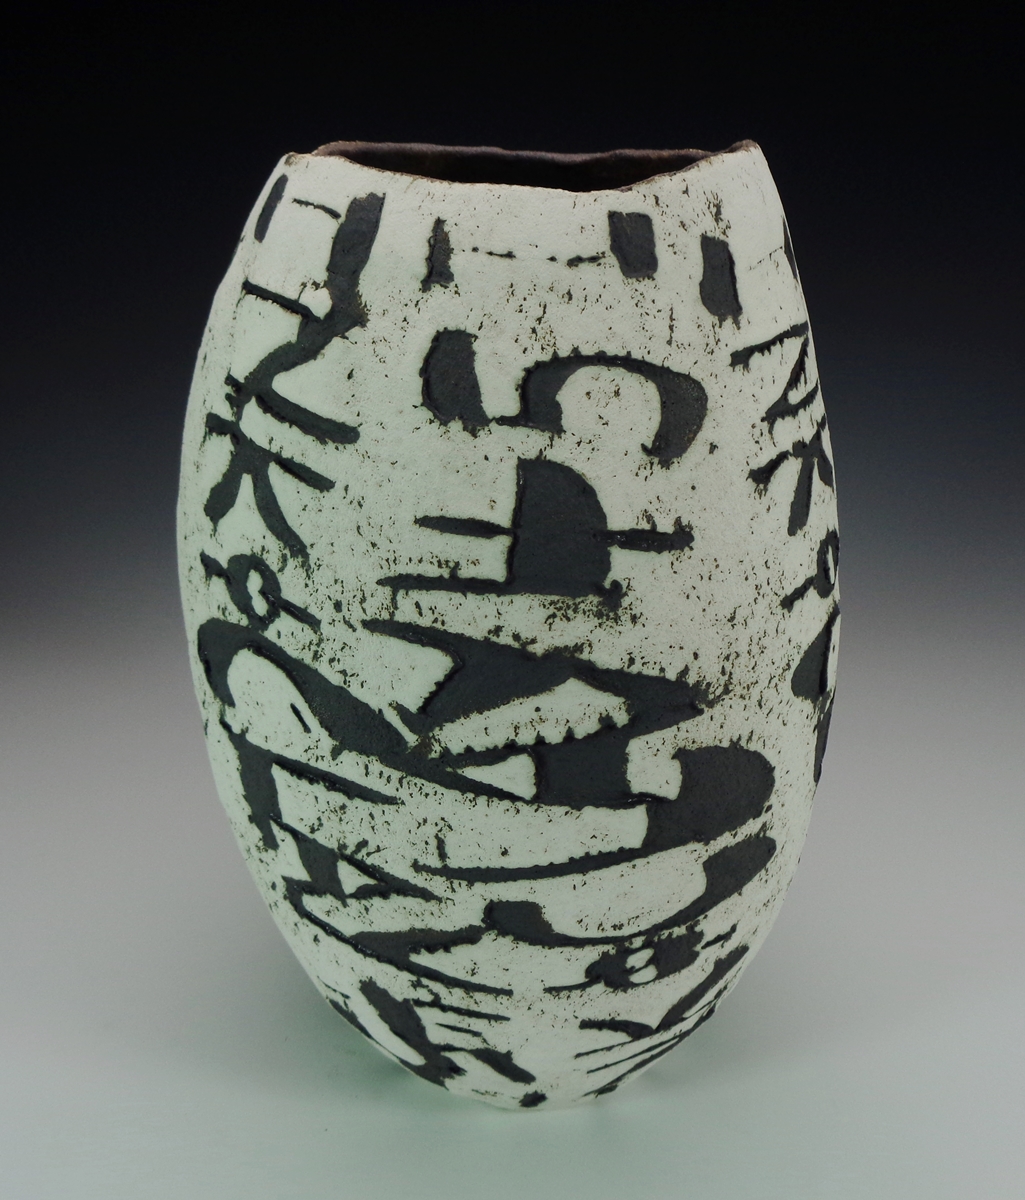 Mark Hendrickson ceramic vessel with Ink and Clay incribed vertically on the surface